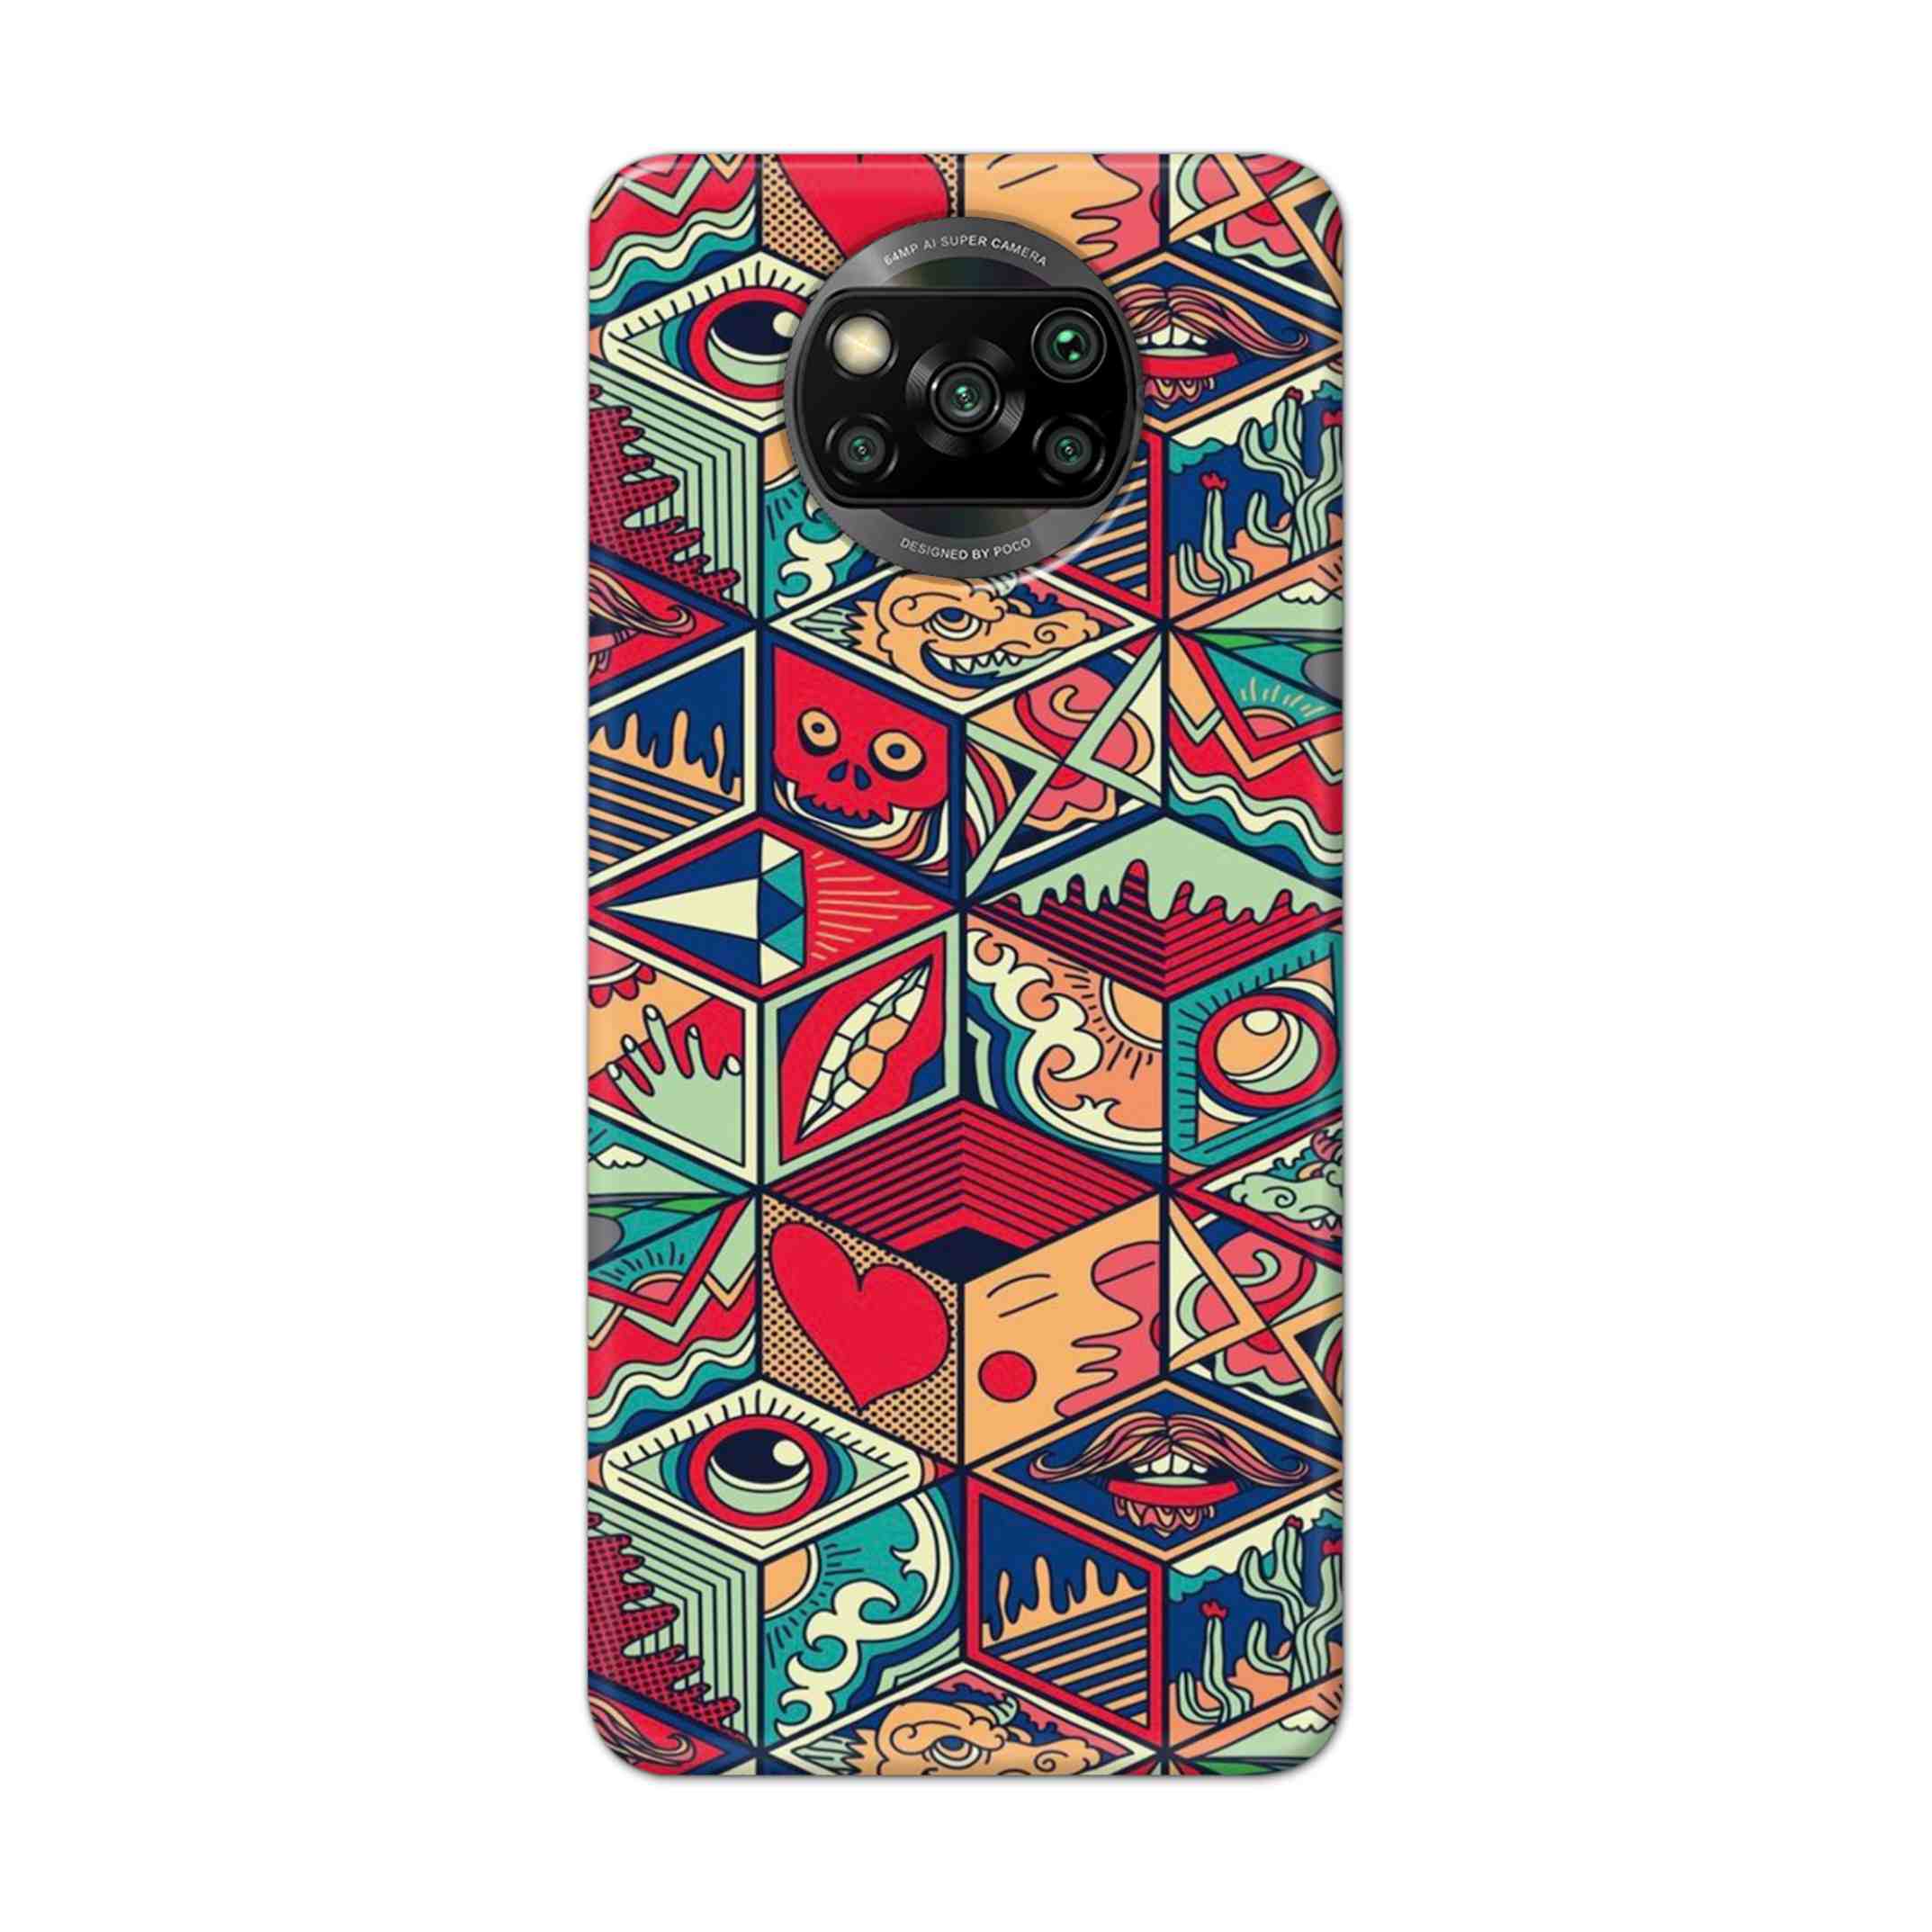 Buy Face Mandala Hard Back Mobile Phone Case Cover For Pcoc X3 NFC Online